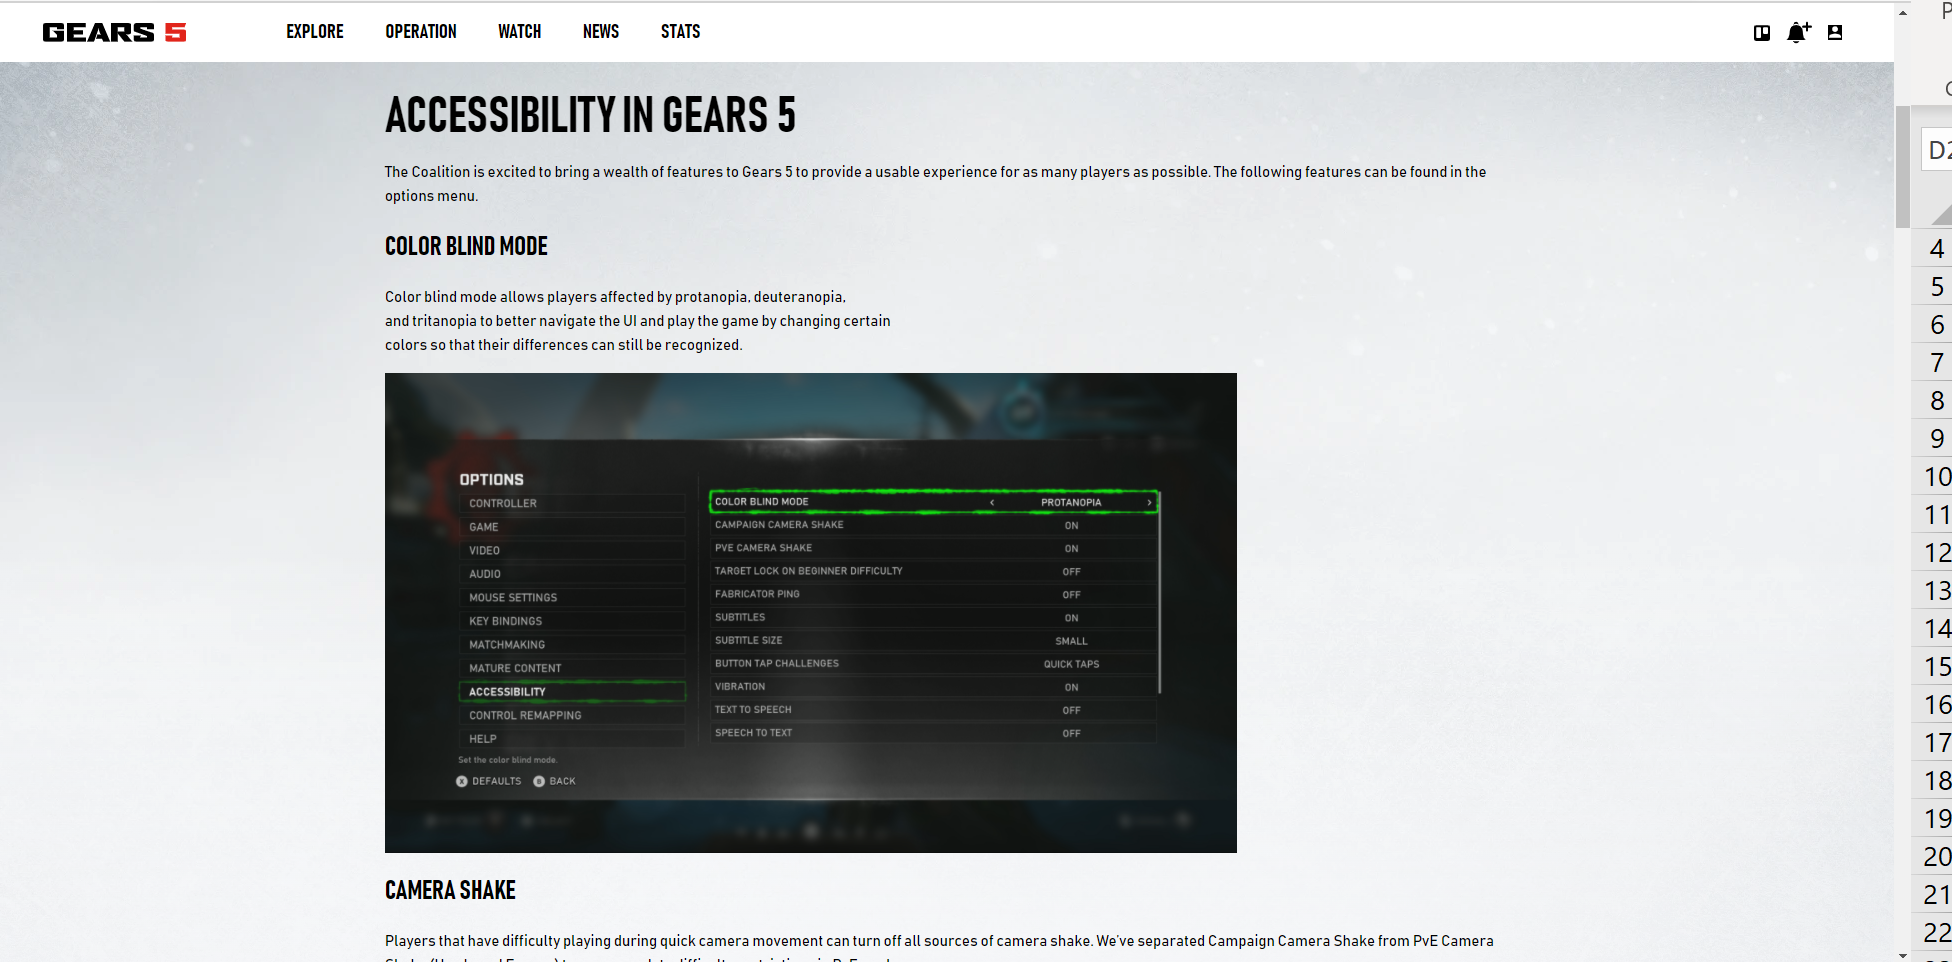 A screenshot of Gears 5 accessibility documentation on their website.